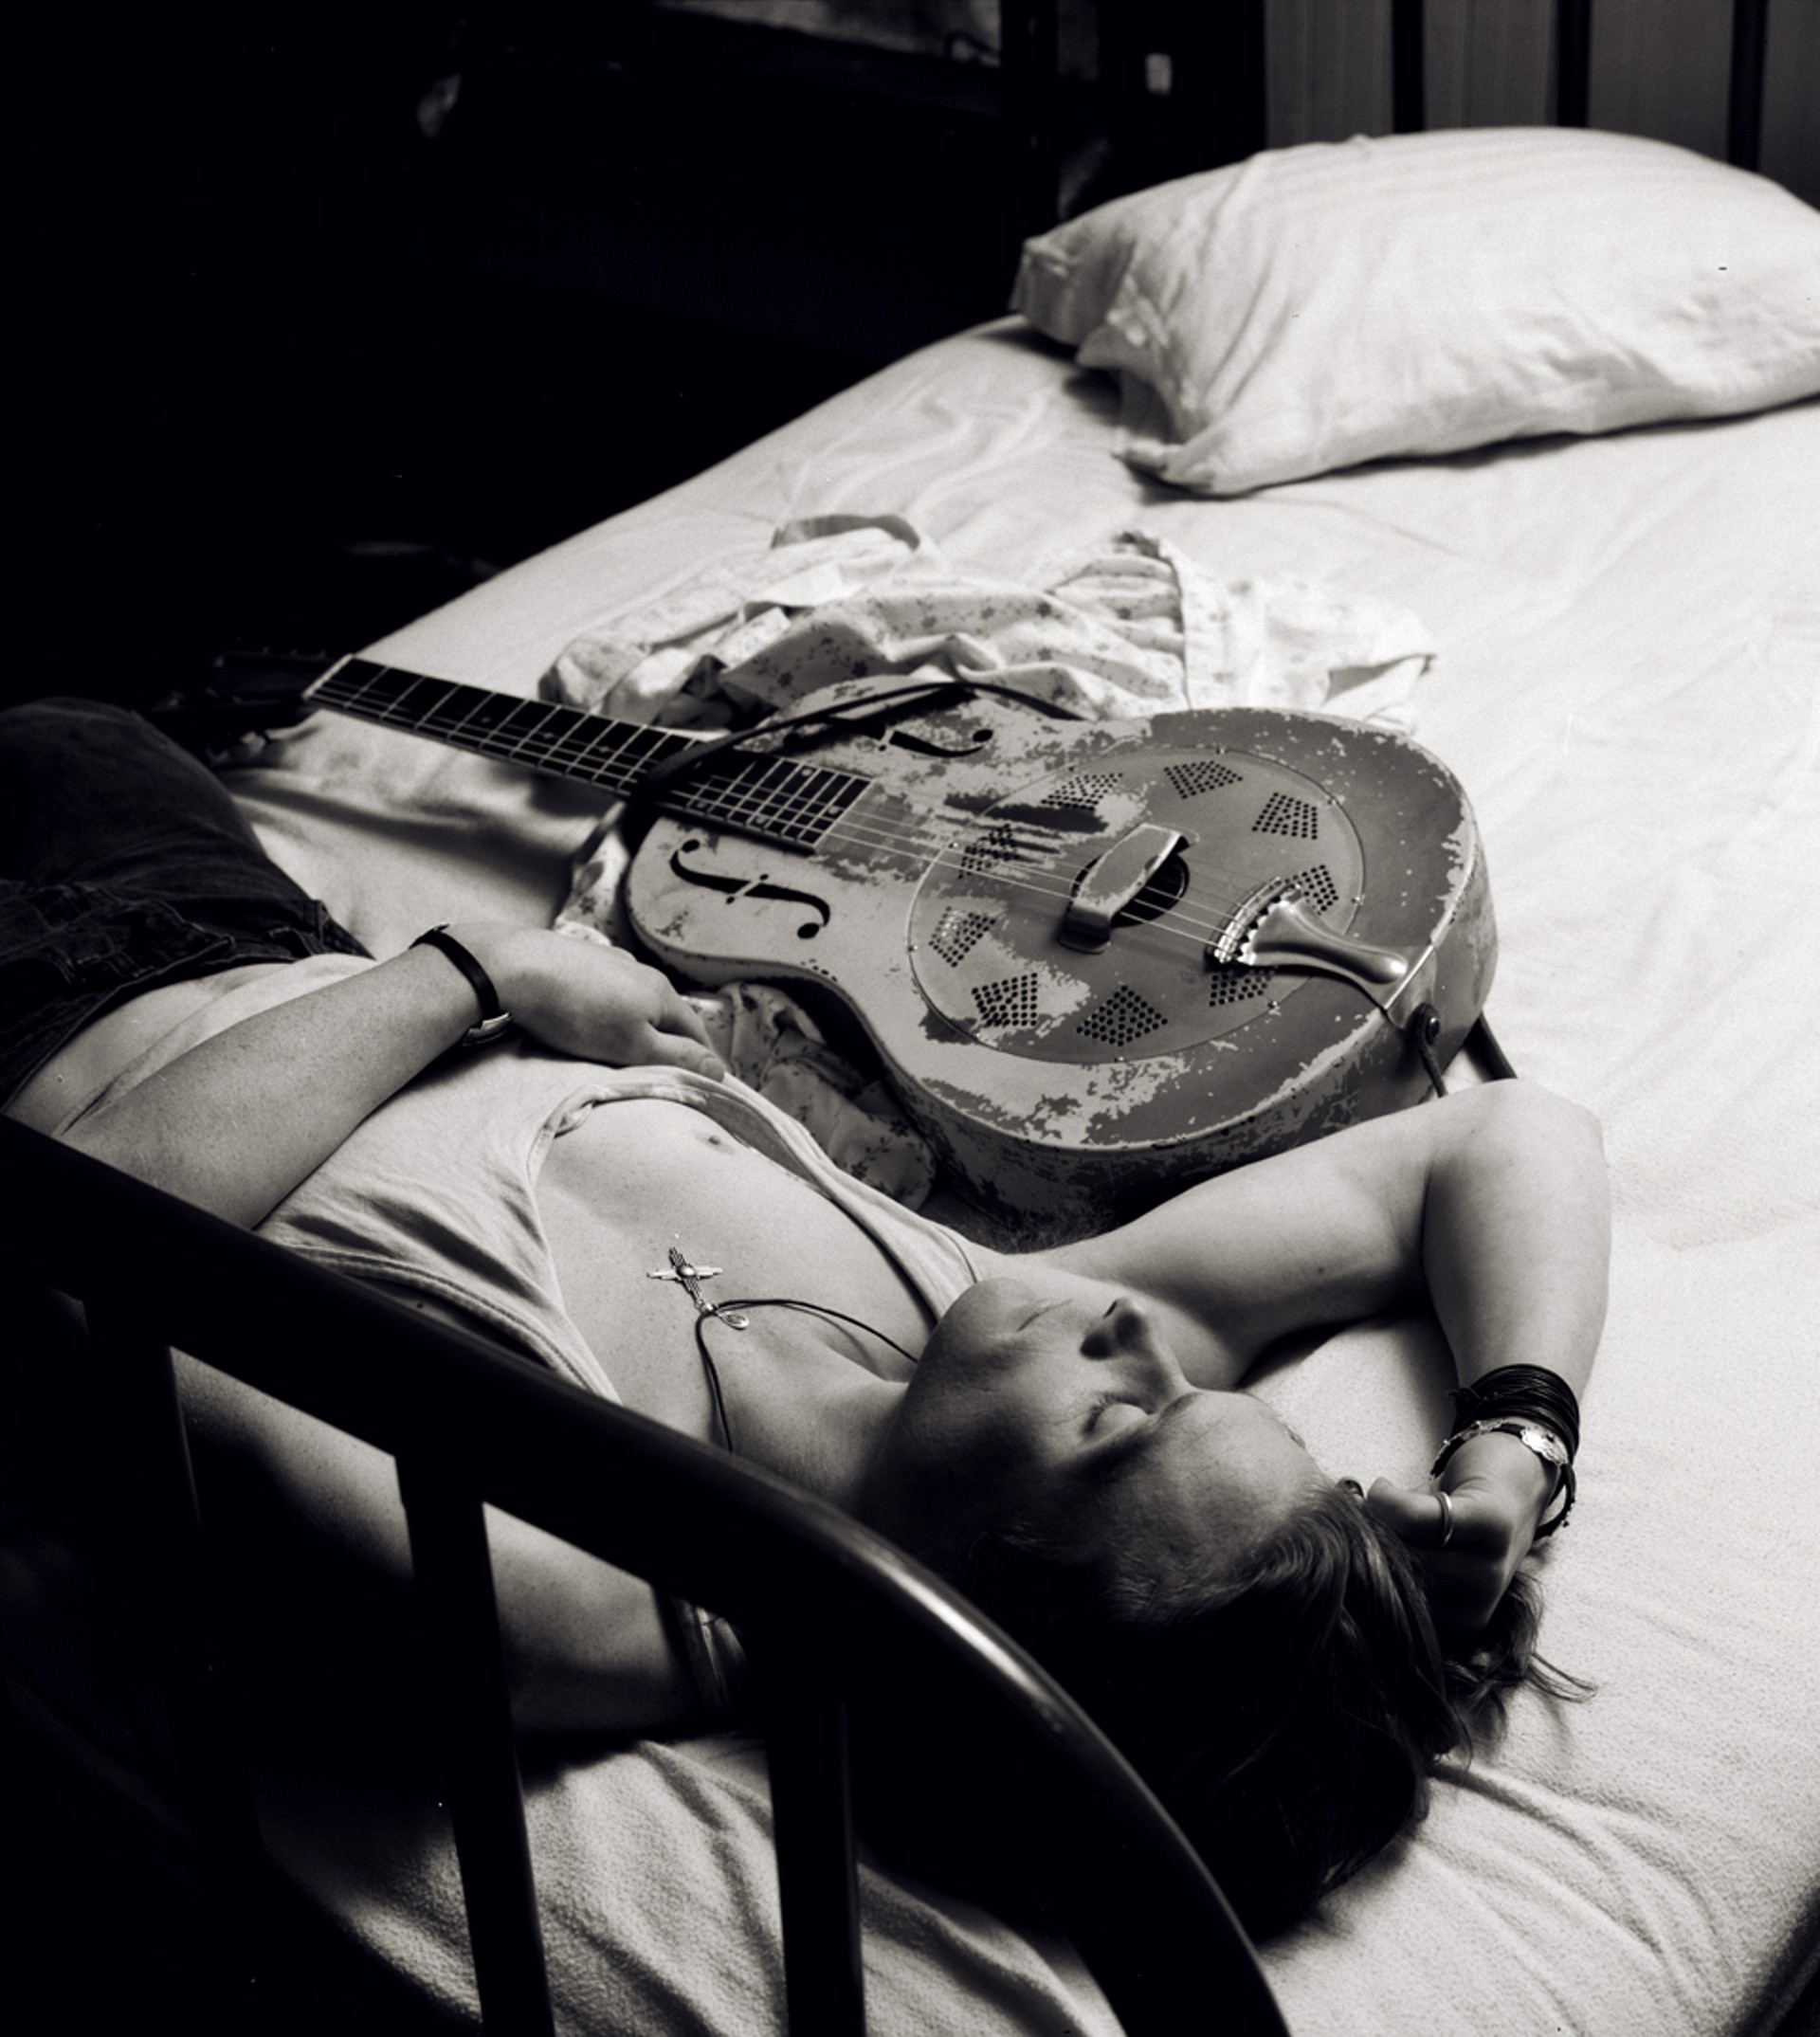 91026 Chris Whitley Bed with Guitar 01 Crop 2 BW by Timothy White